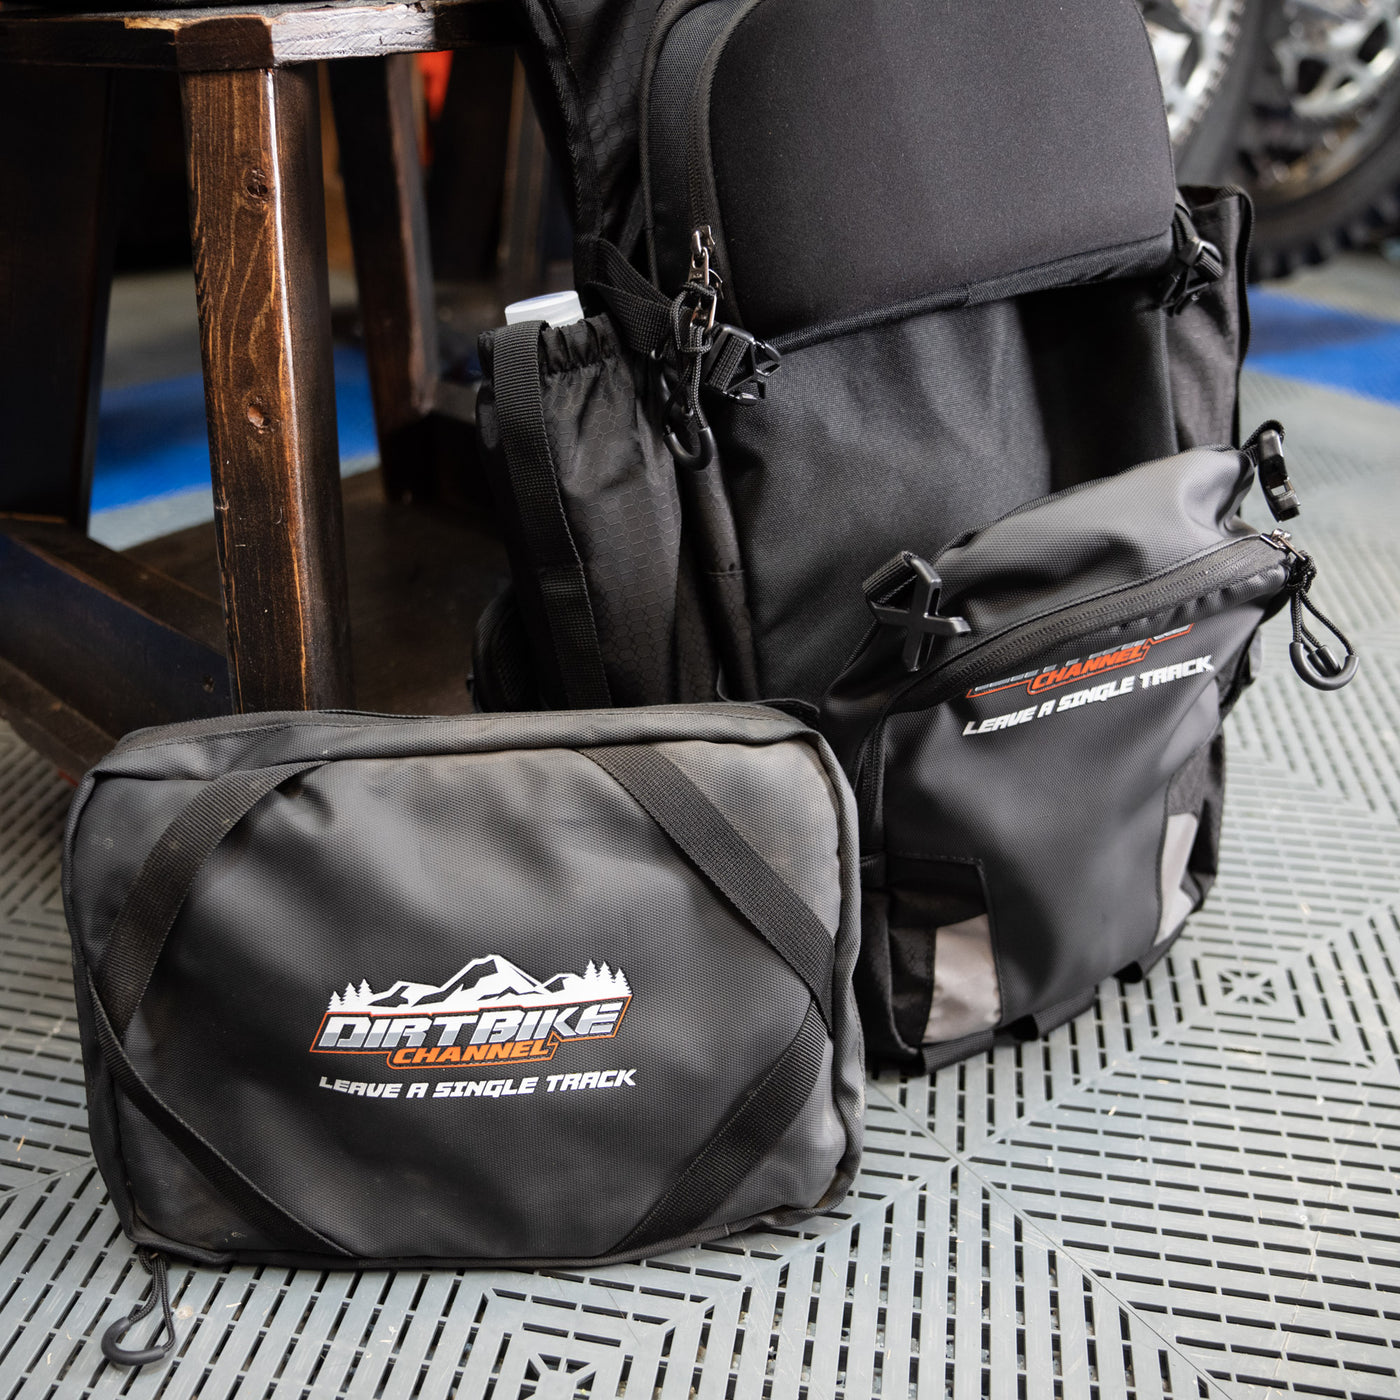 DBC Enduro Riding Pack (with tool organizer included) - Stealth Black